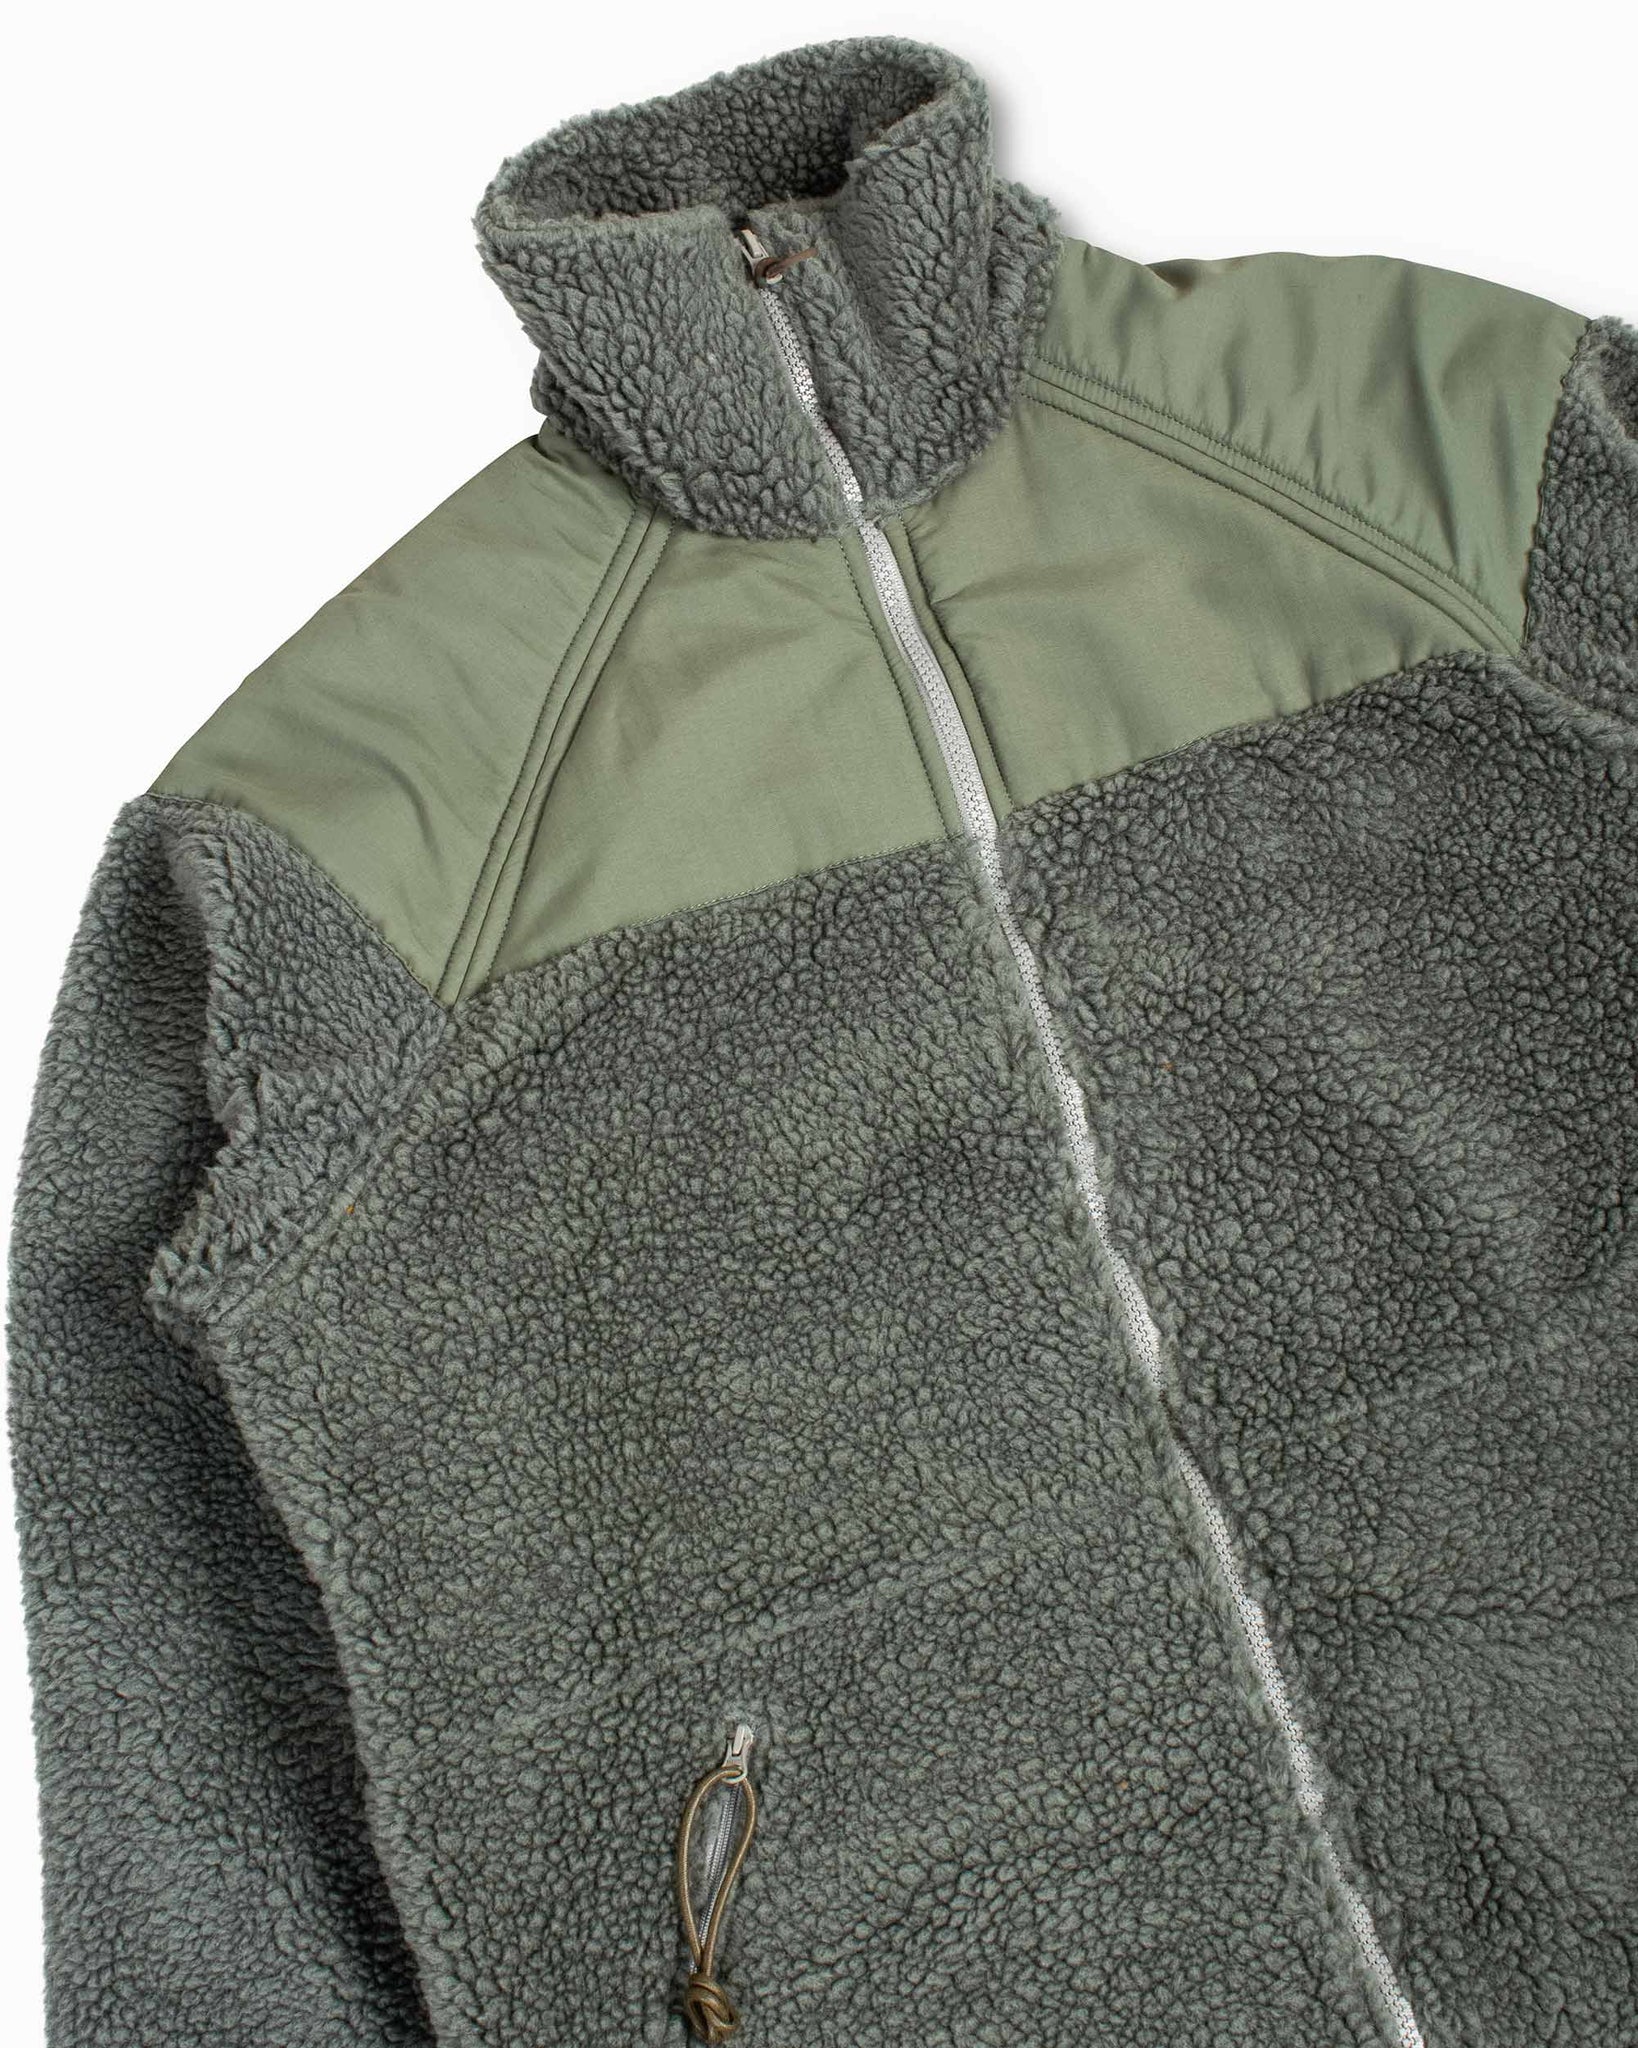 The Real McCoy's MJ22112 Shirt, Cold Weather, Level 3 Sage Green Detail